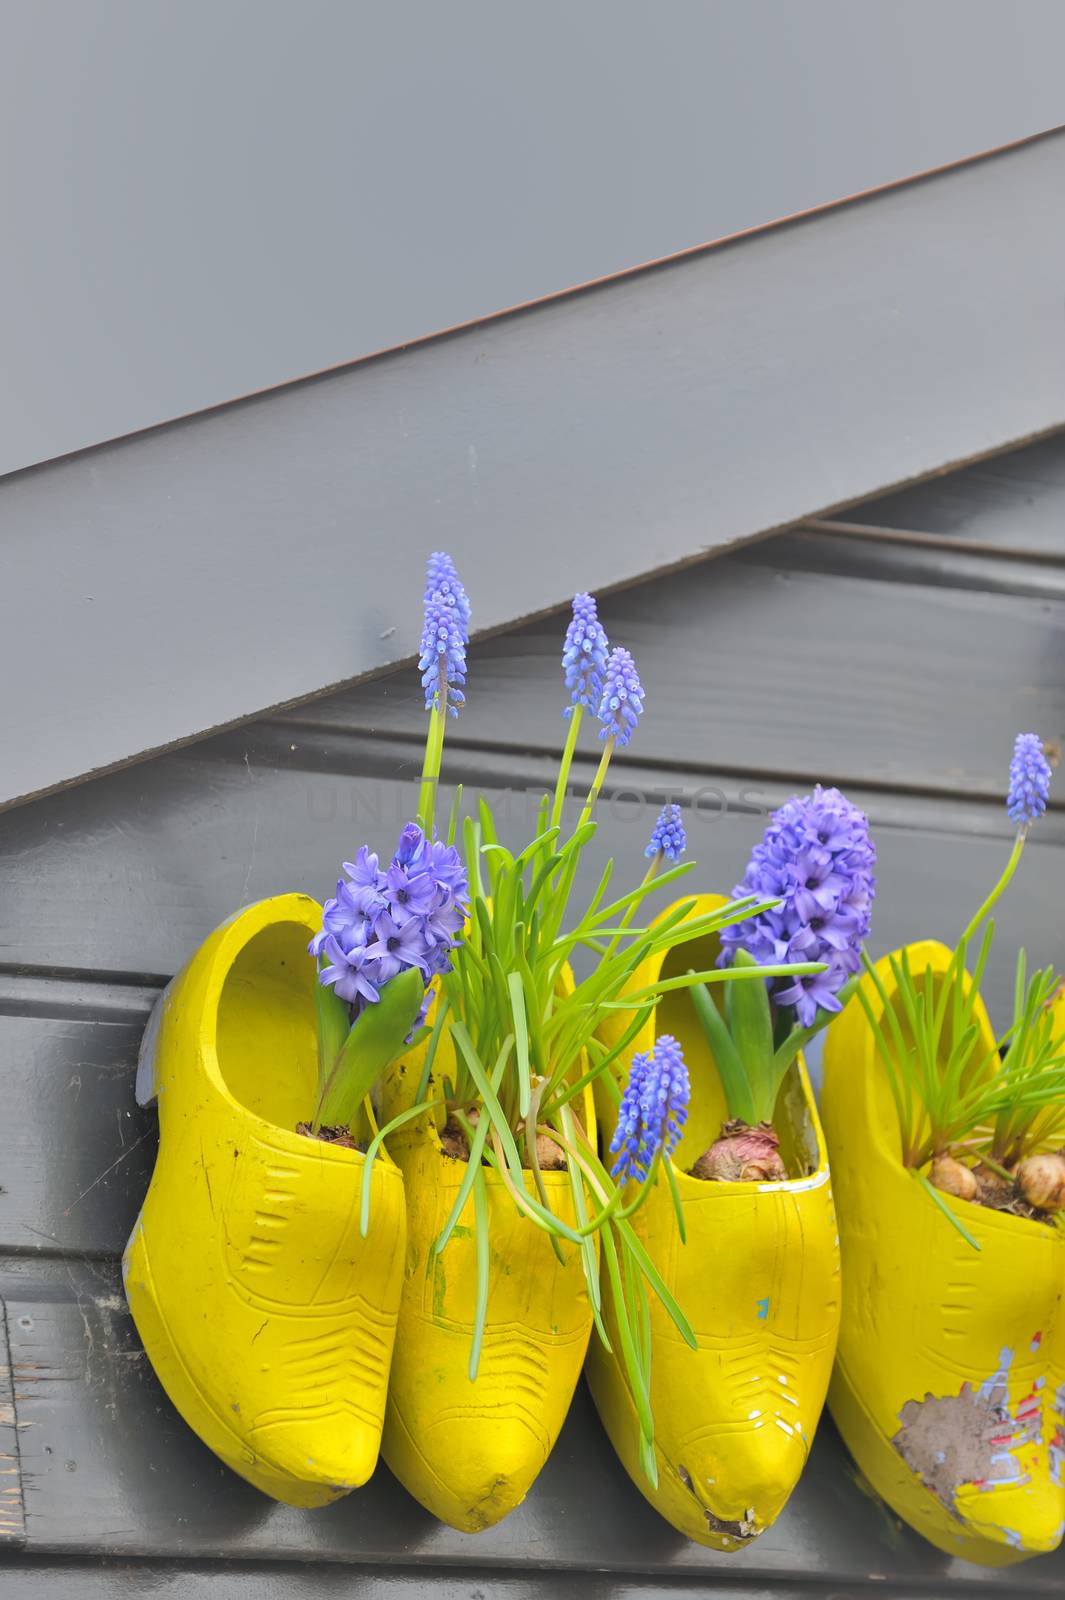 Traditional national wooden shoes Klomp like flowerpots with flowers